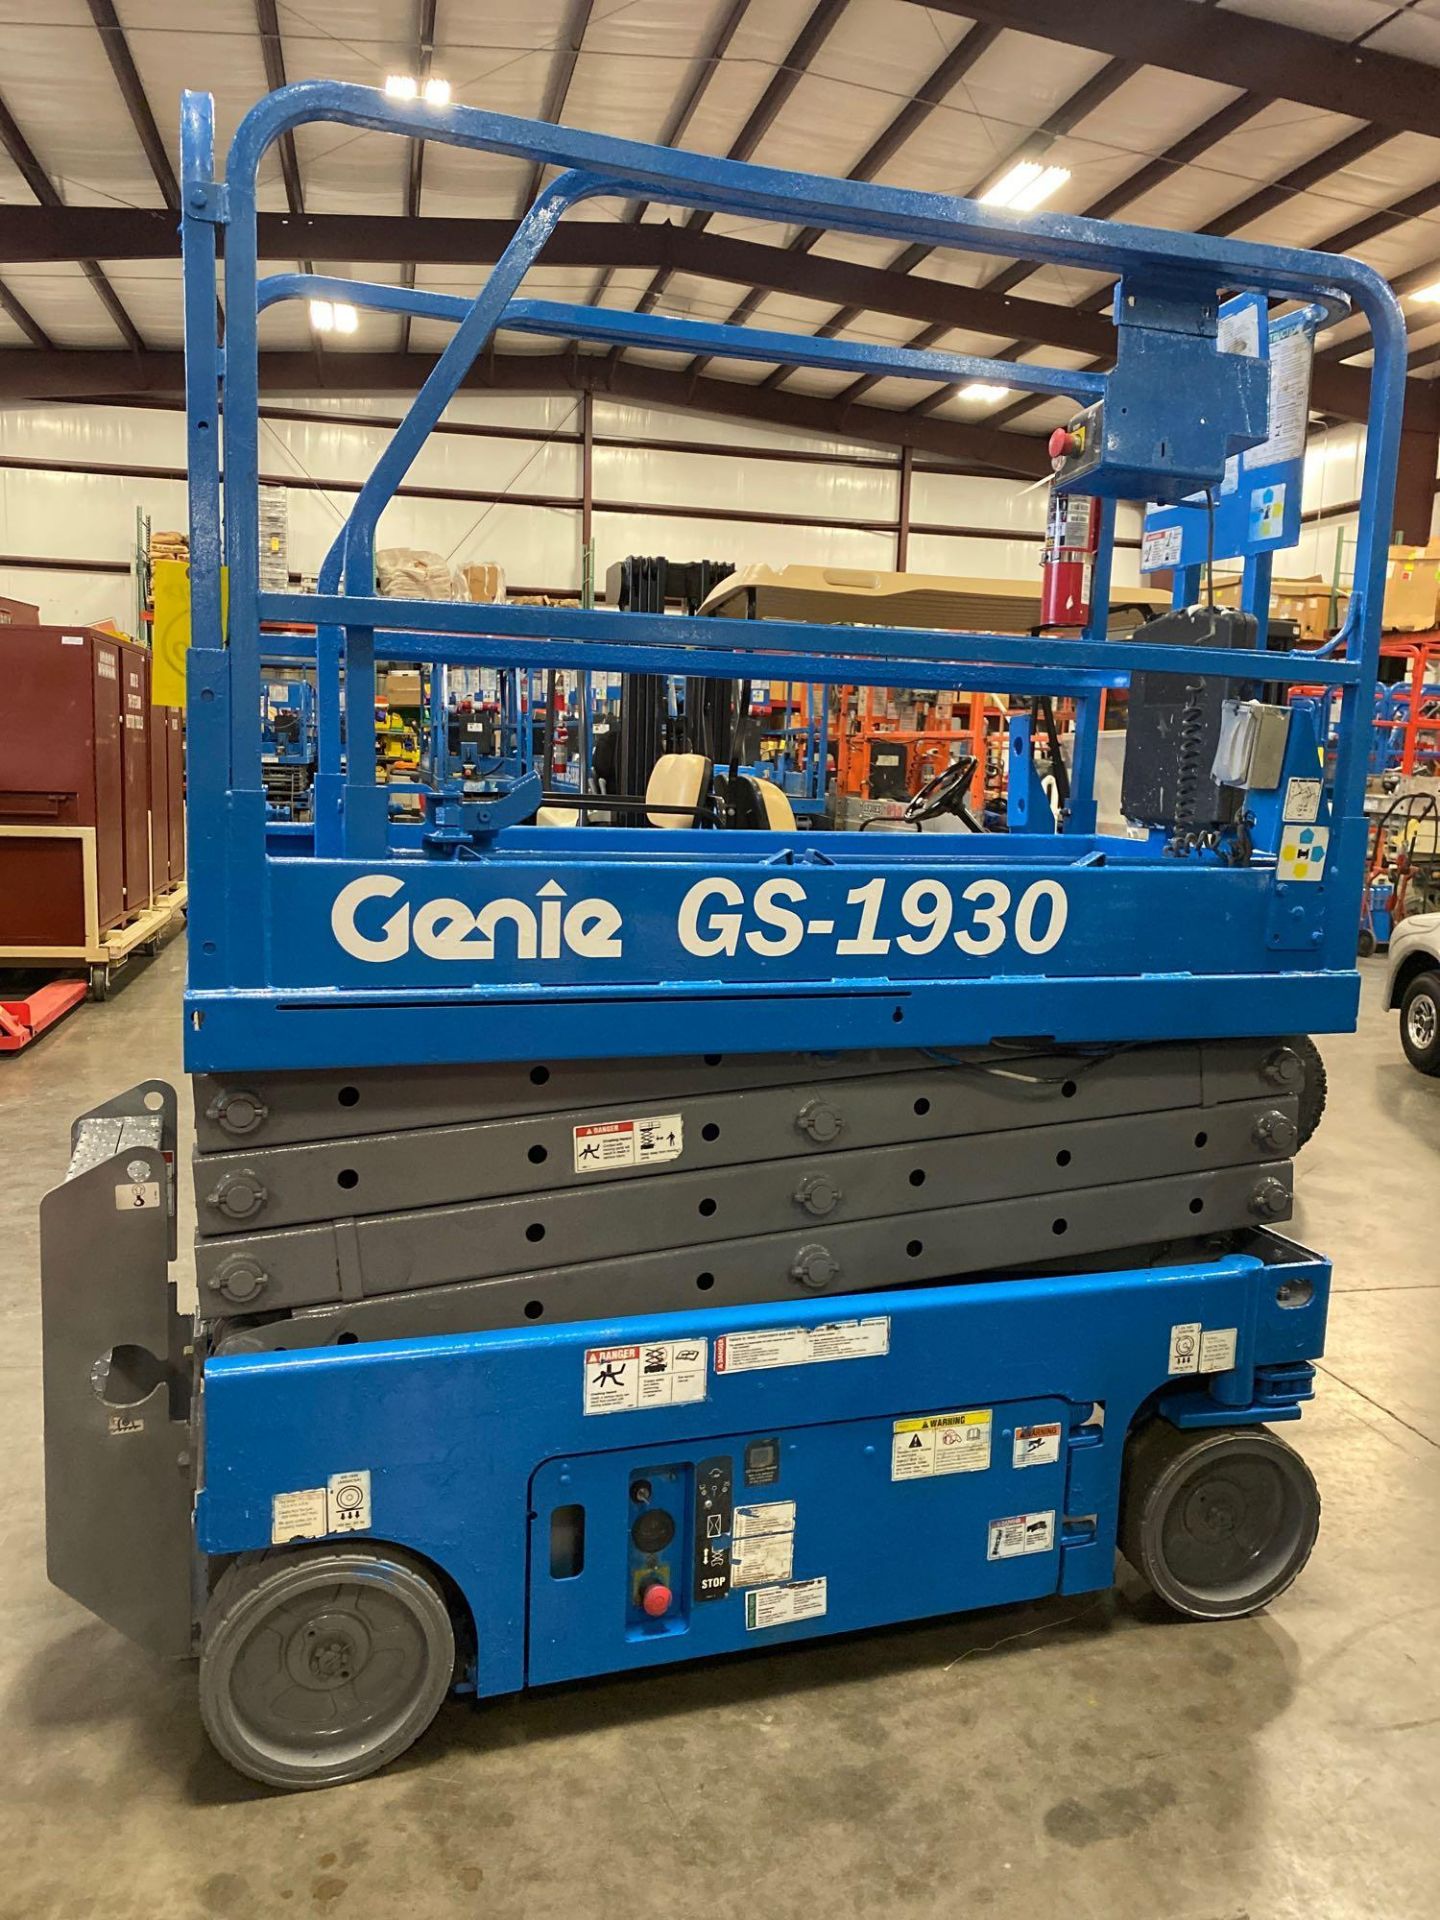 GENIE GS1930 SCISSOR LIFT, SELF PROPELLED, 19' PLATFORM HEIGHT, BUILT IN BATTERY CHARGER, - Image 7 of 8